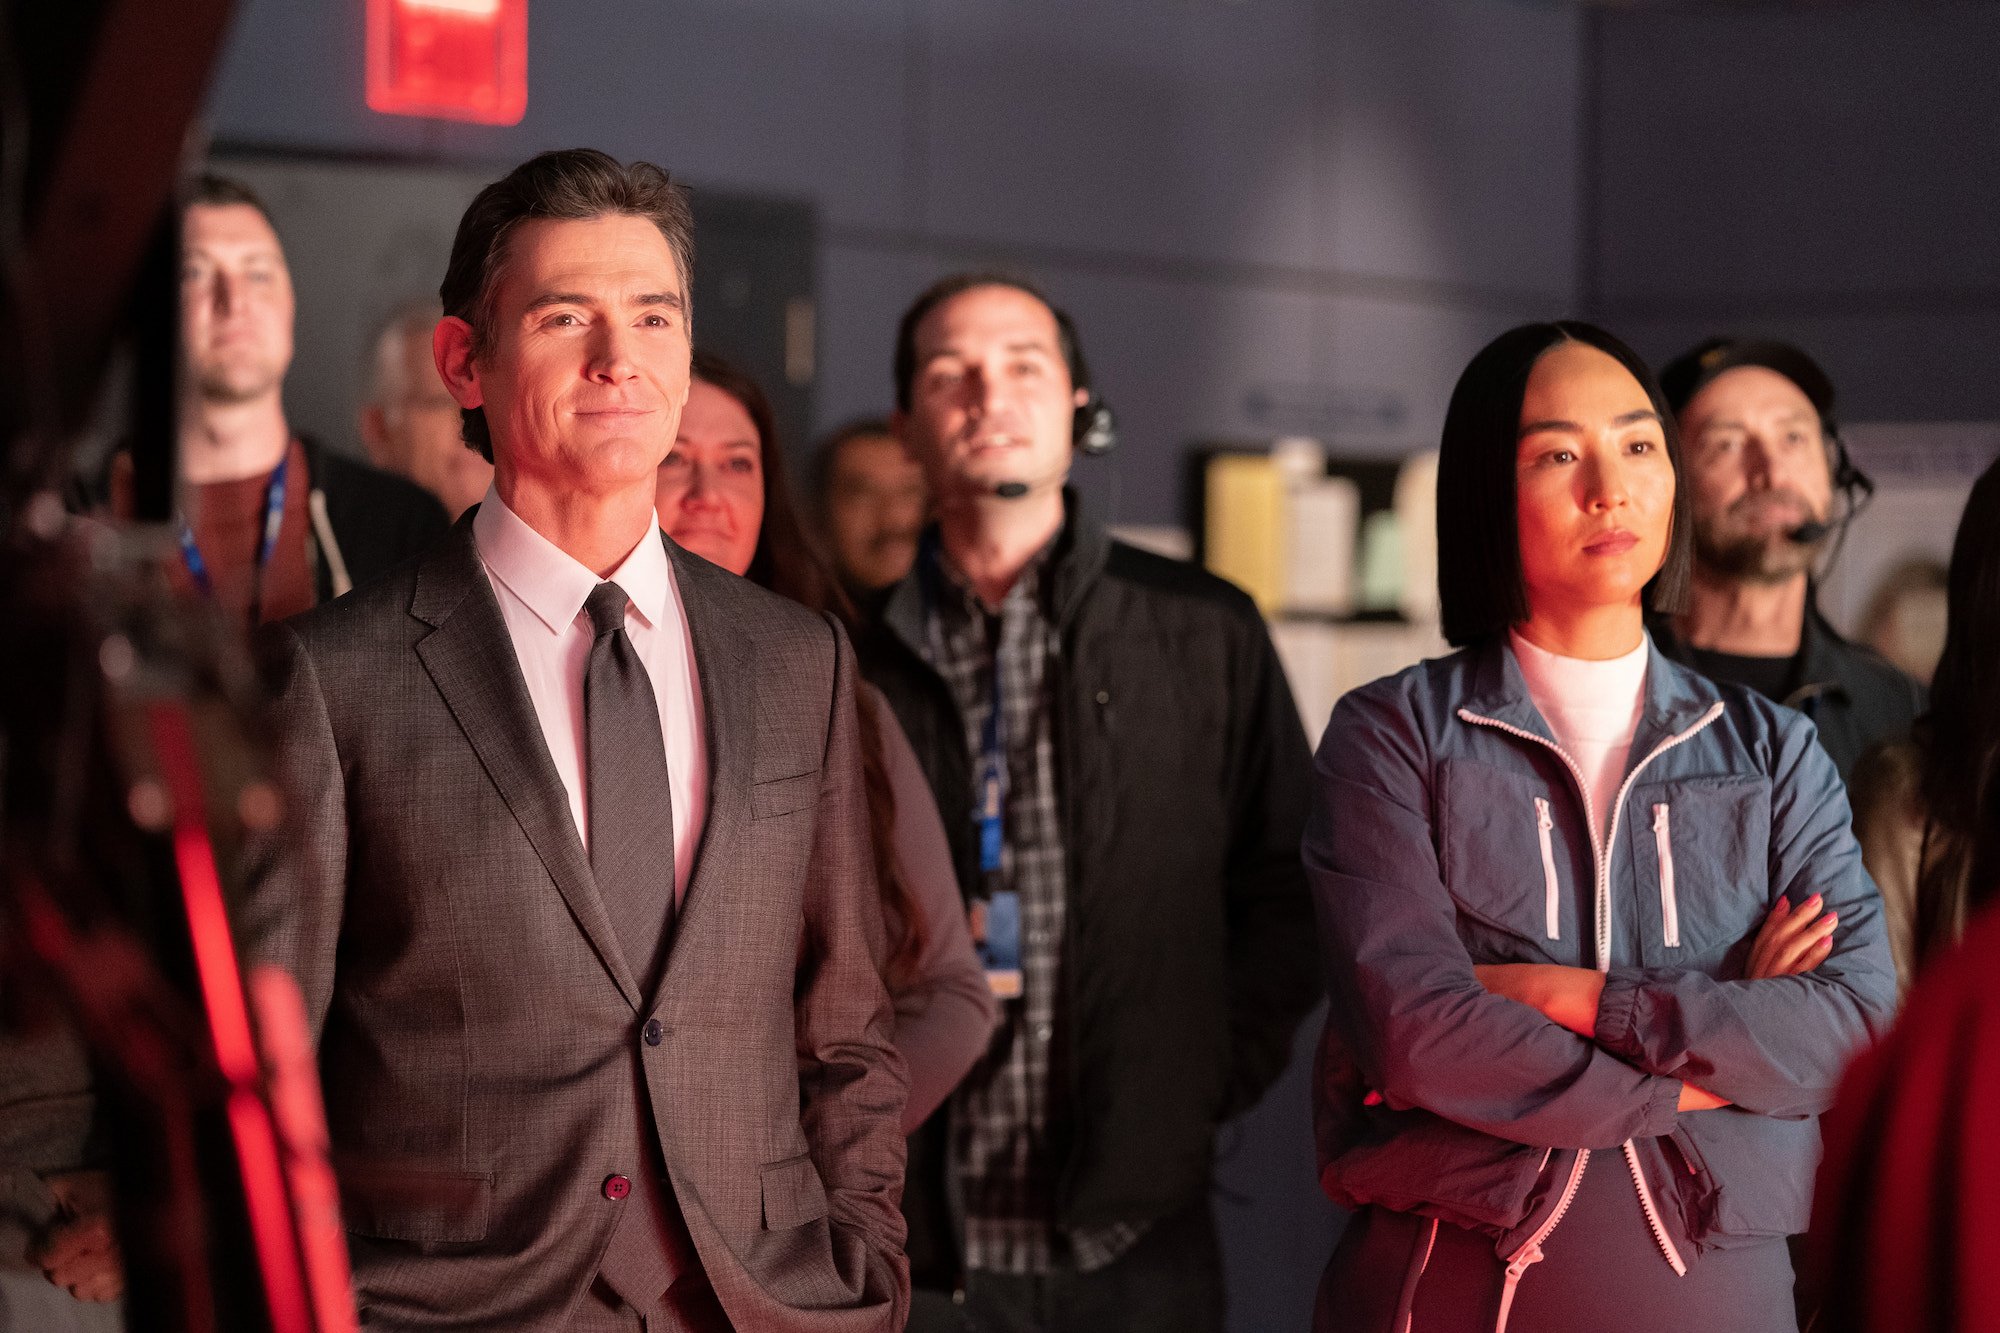 The Morning Show stars Billy Crudup and Greta Lee watch Foo Fighters perform